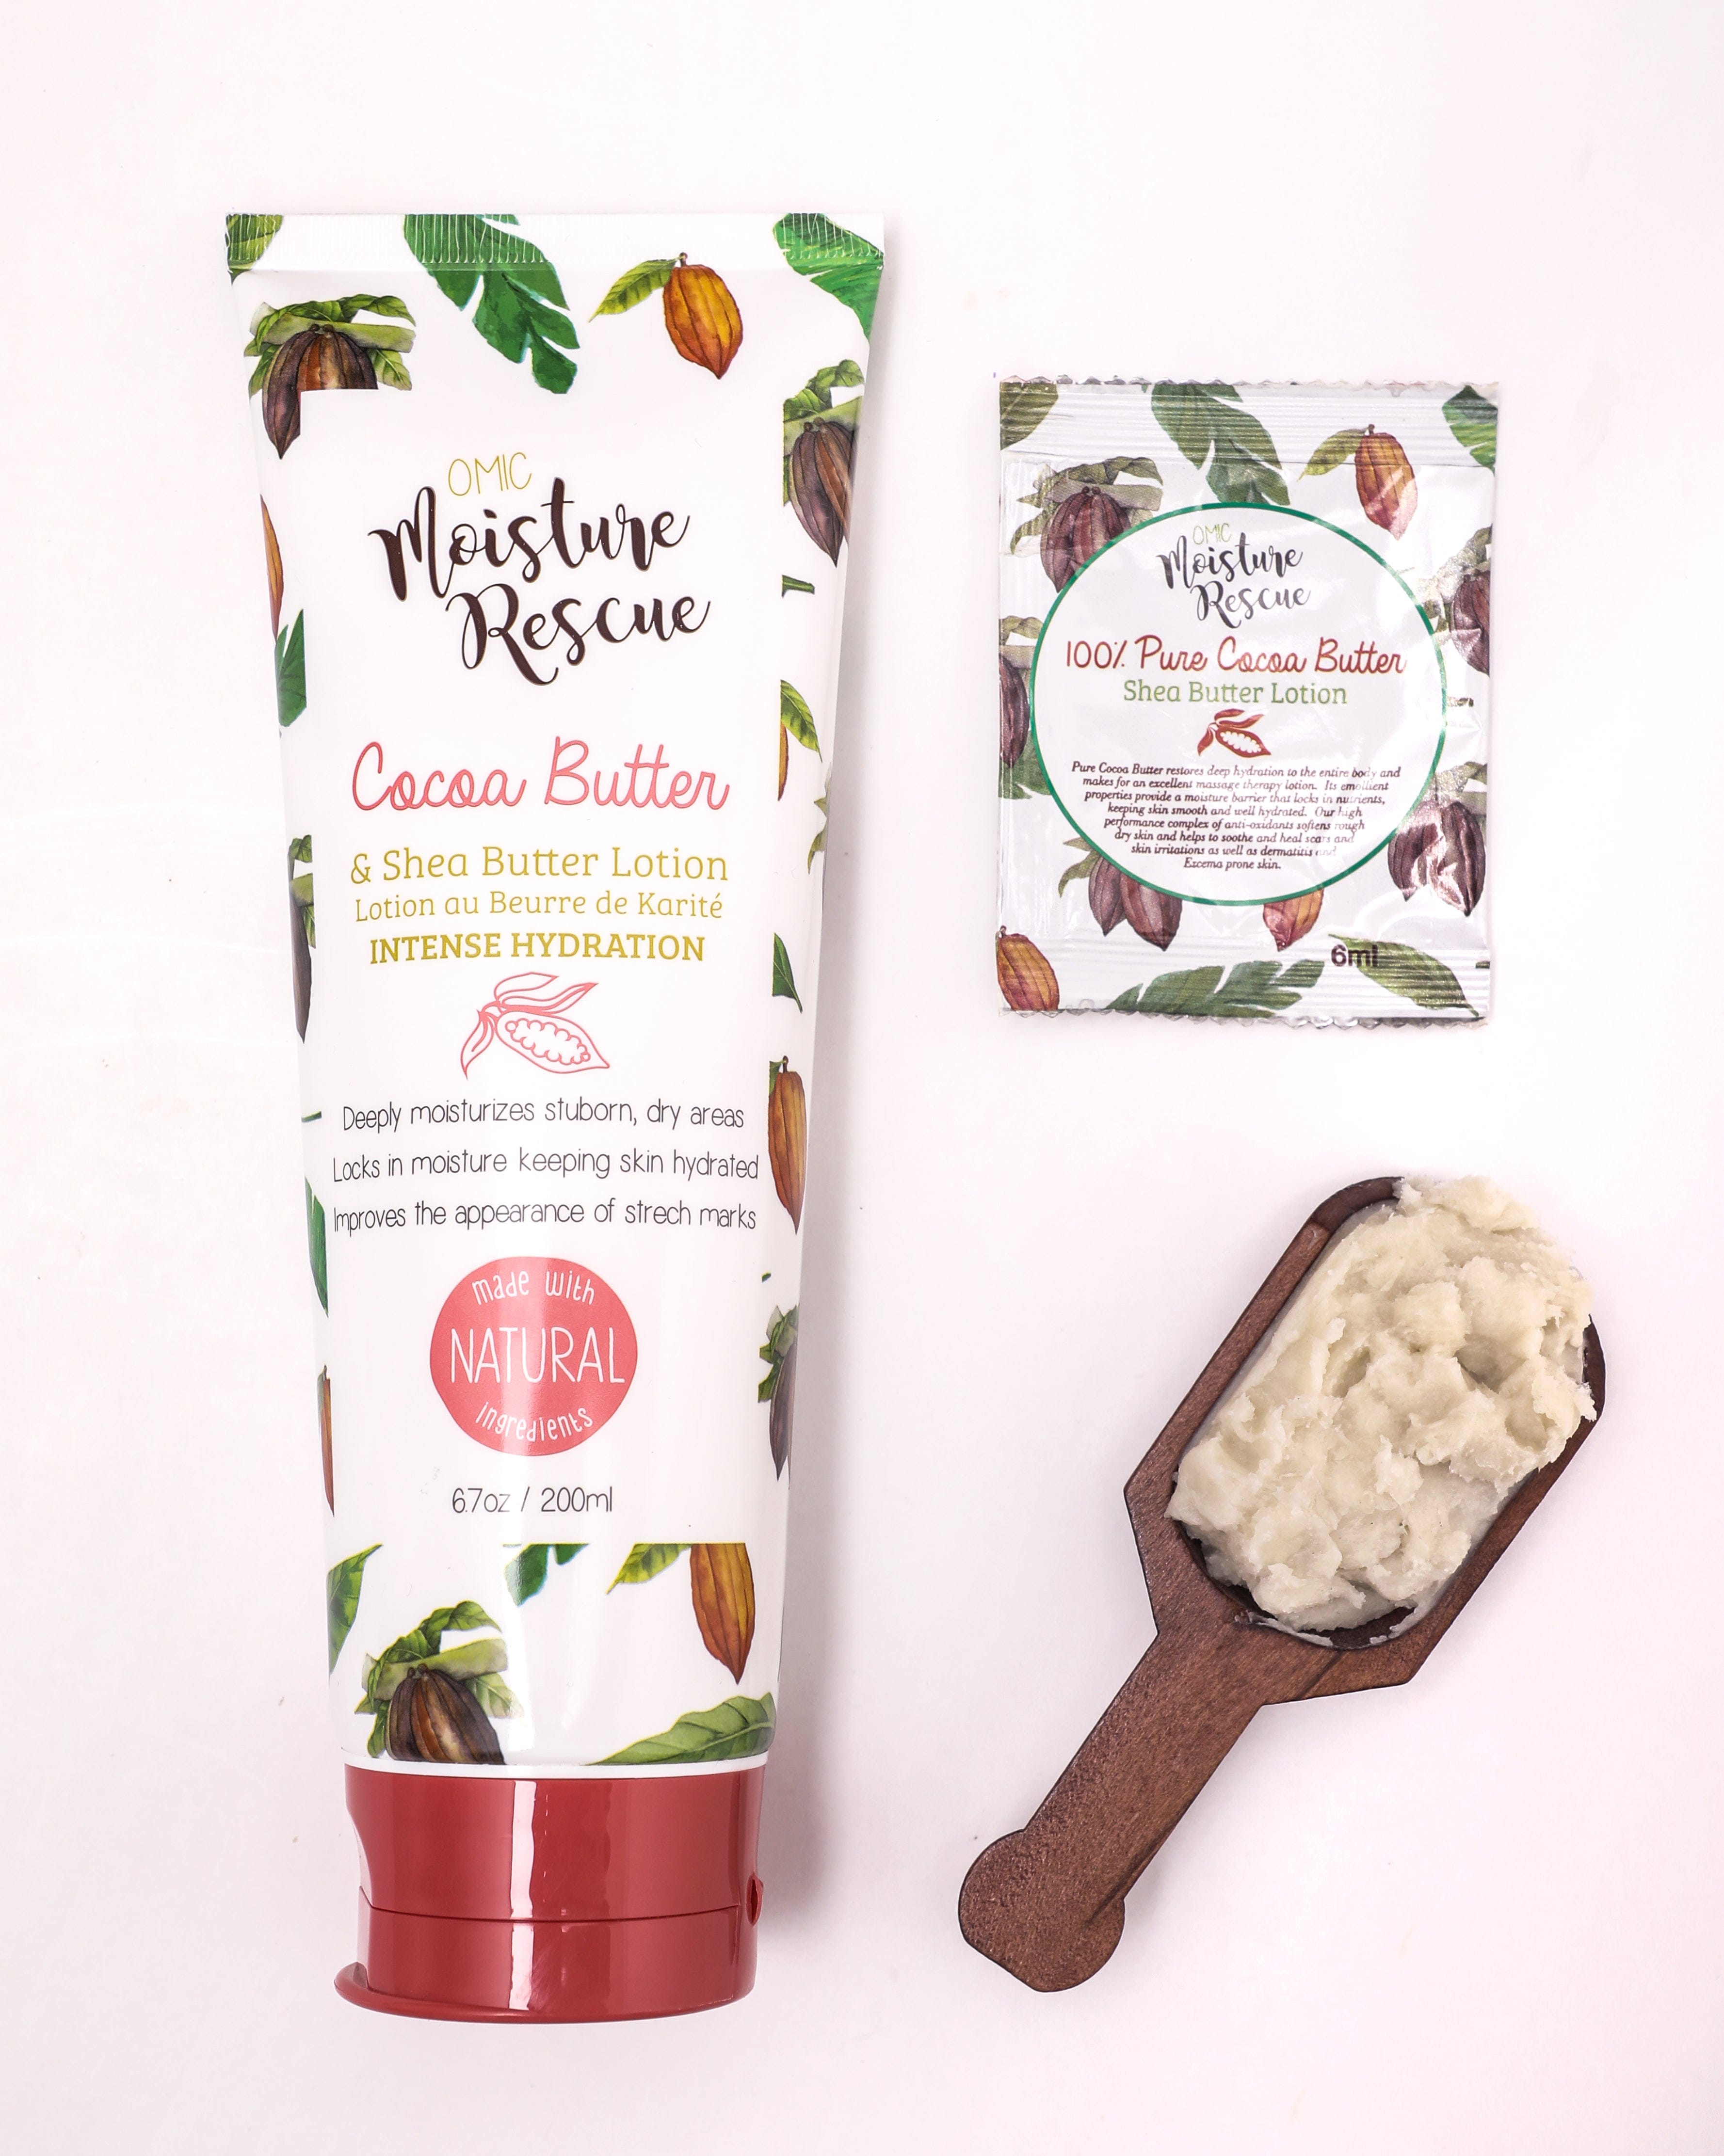 Moisture Rescue Shea Butter Lotion Tube mit Kakaobutter Mitchell Brands - Mitchell Brands - Skin Lightening, Skin Brightening, Fade Dark Spots, Shea Butter, Hair Growth Products